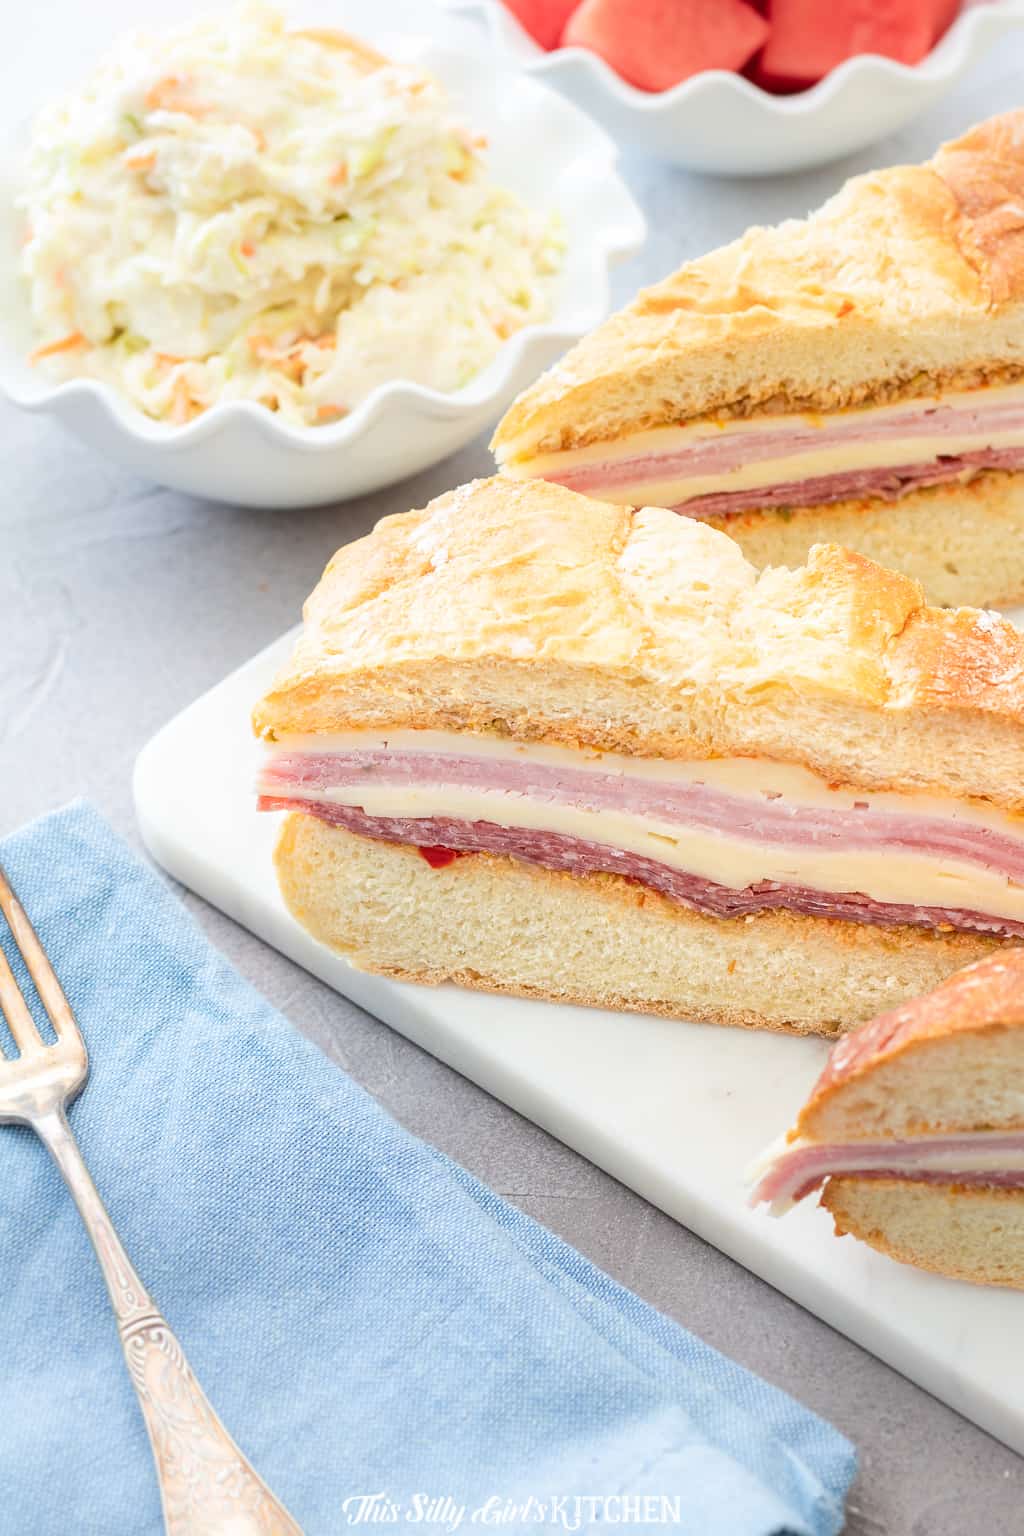 This recipe for the muffaletta is an easy version, perfect for make-ahead lunches! #recipe from ThisSillyGirlsKitchen.com #muffaletta #muffuletta #sandwich #lunch